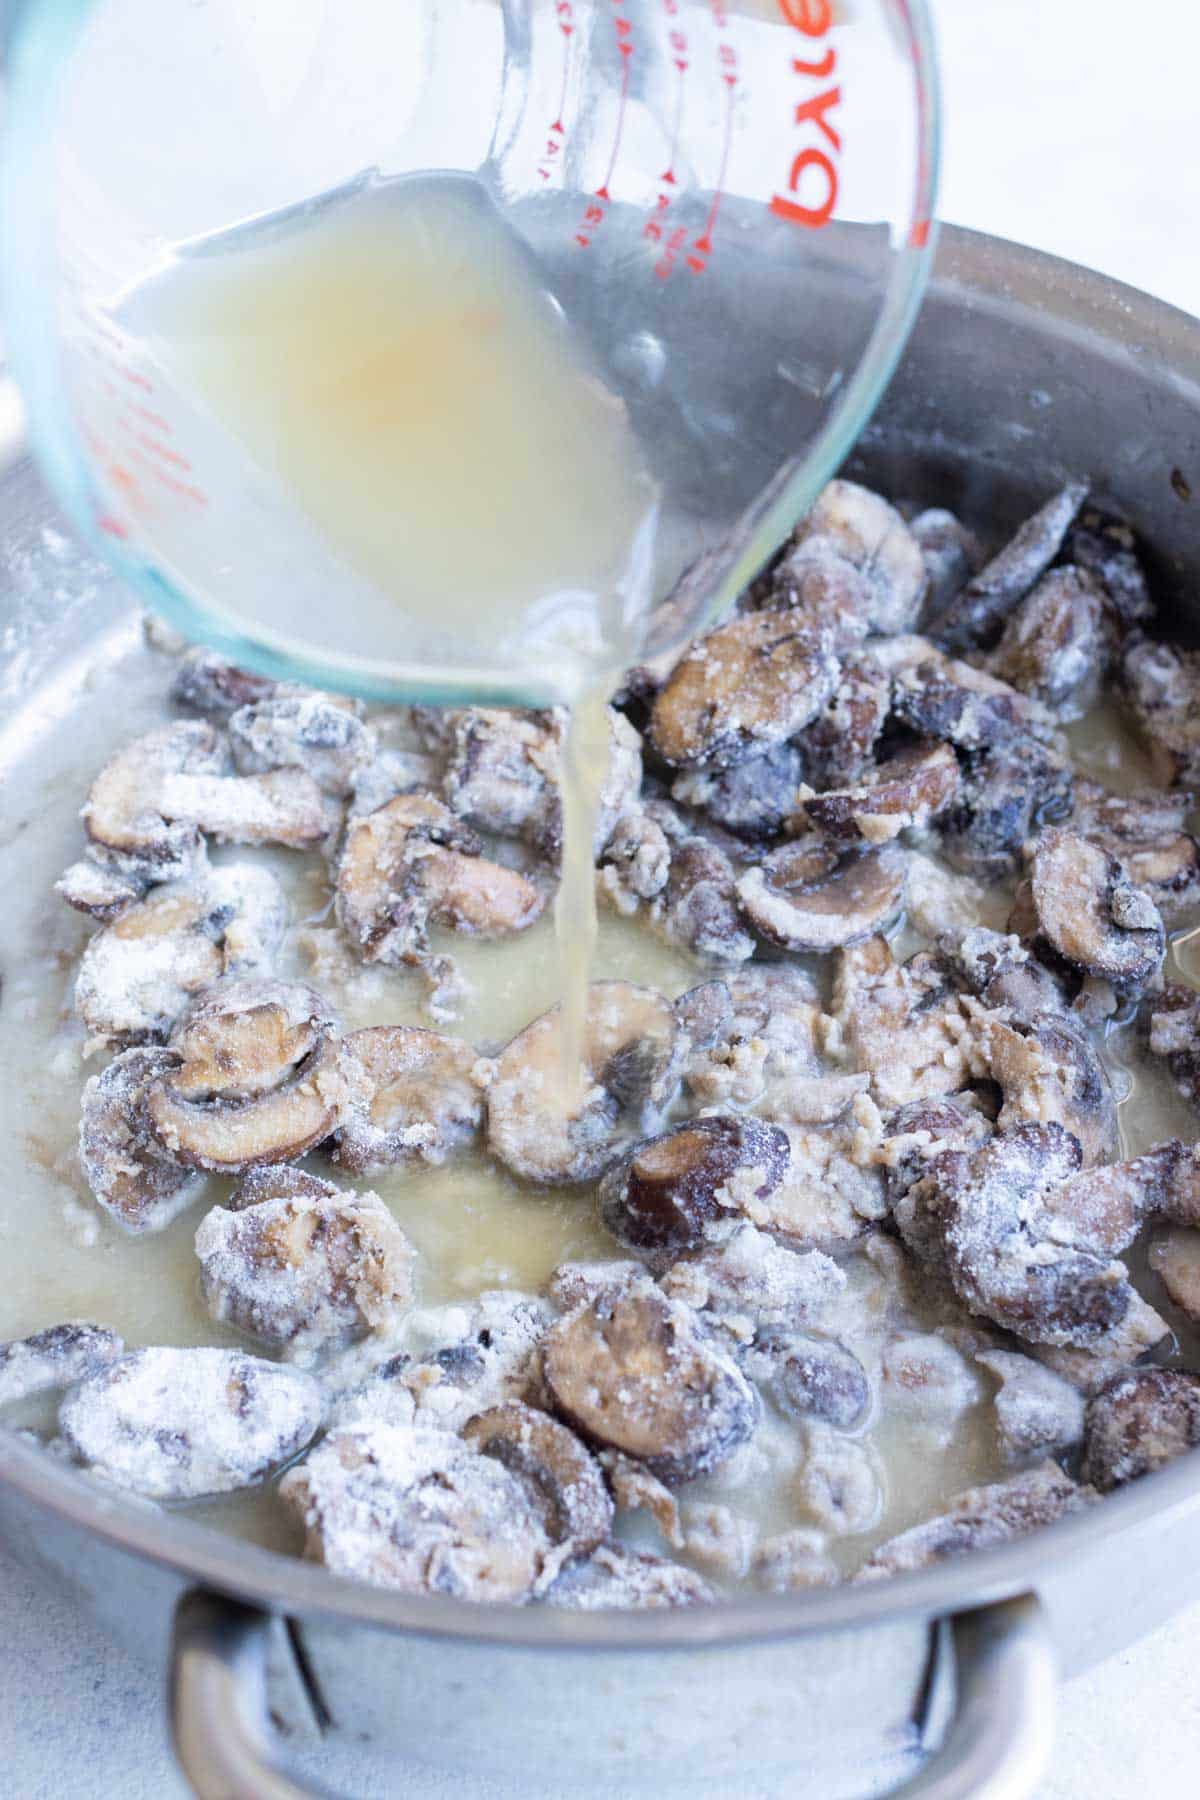 Broth is poured into sauteed mushrooms in a skillet.